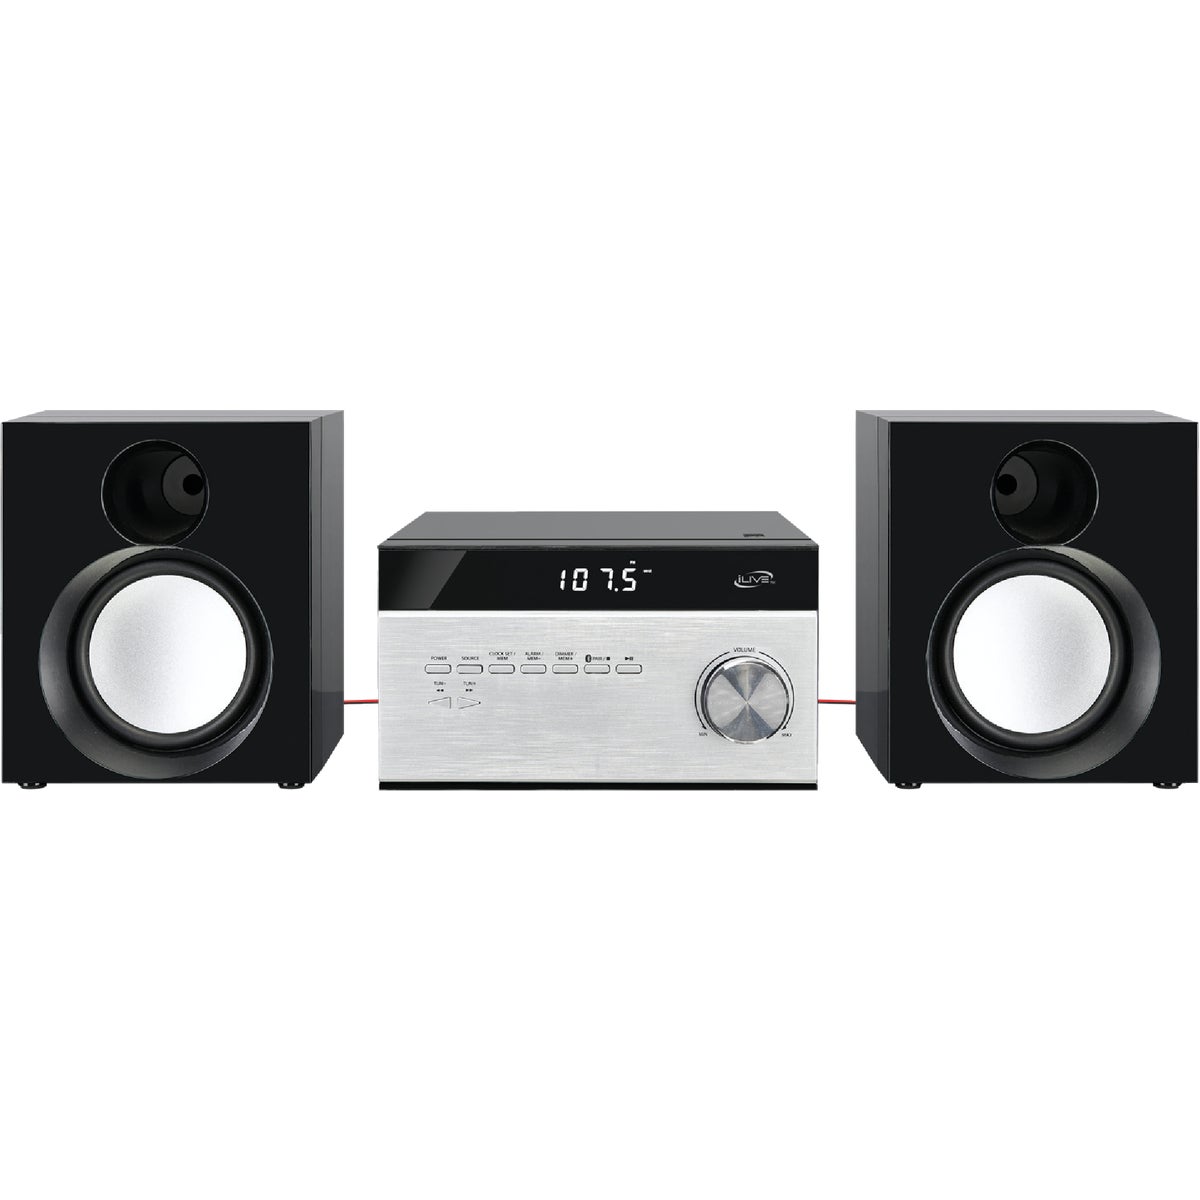 Item 603061, Home Music Stereo System has bluetooth wireless range up to 60 Ft.